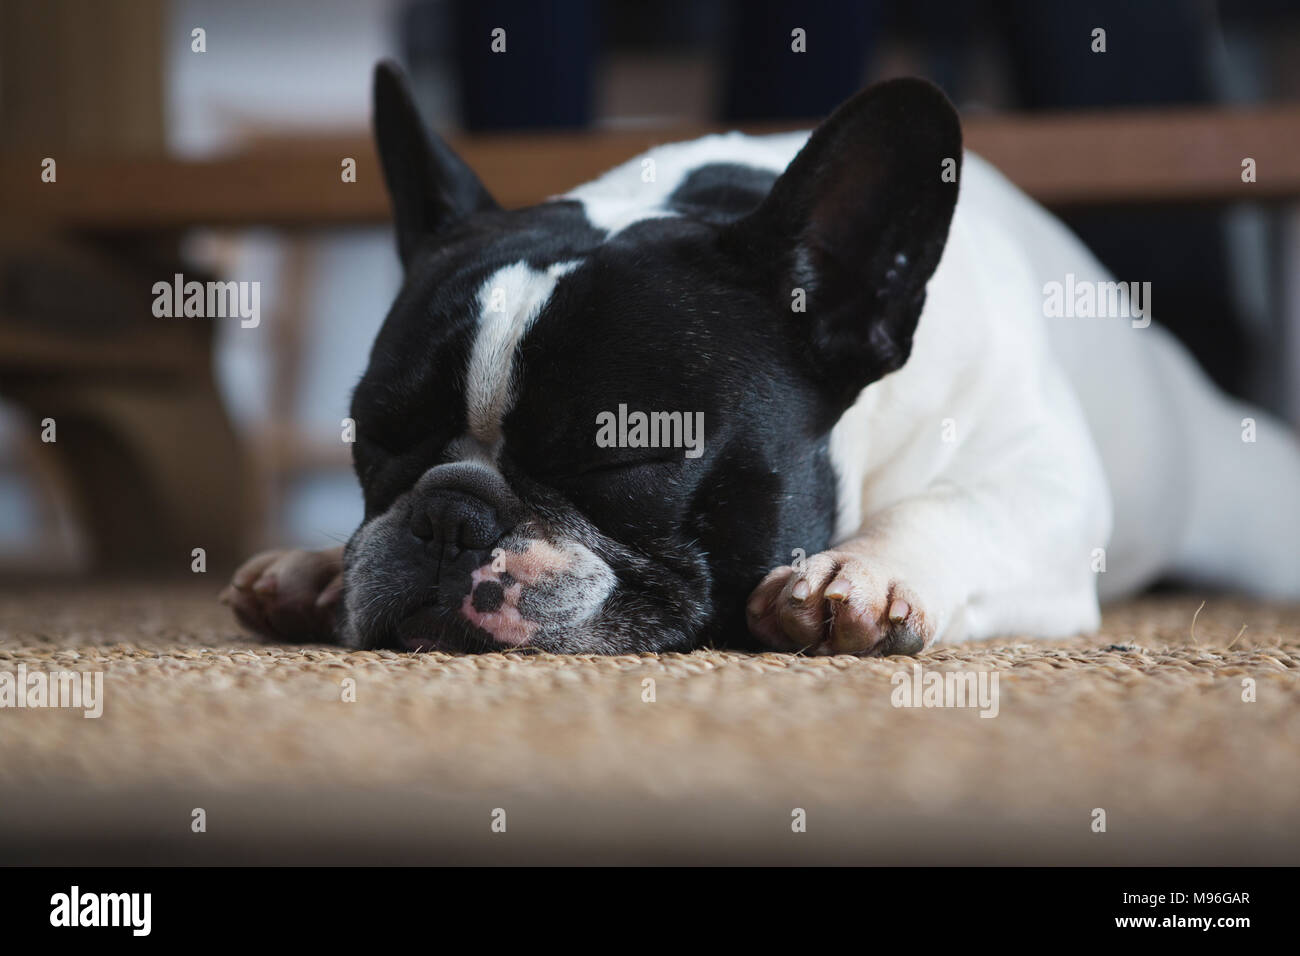 Dog lying on floor mat at home Stock Photo